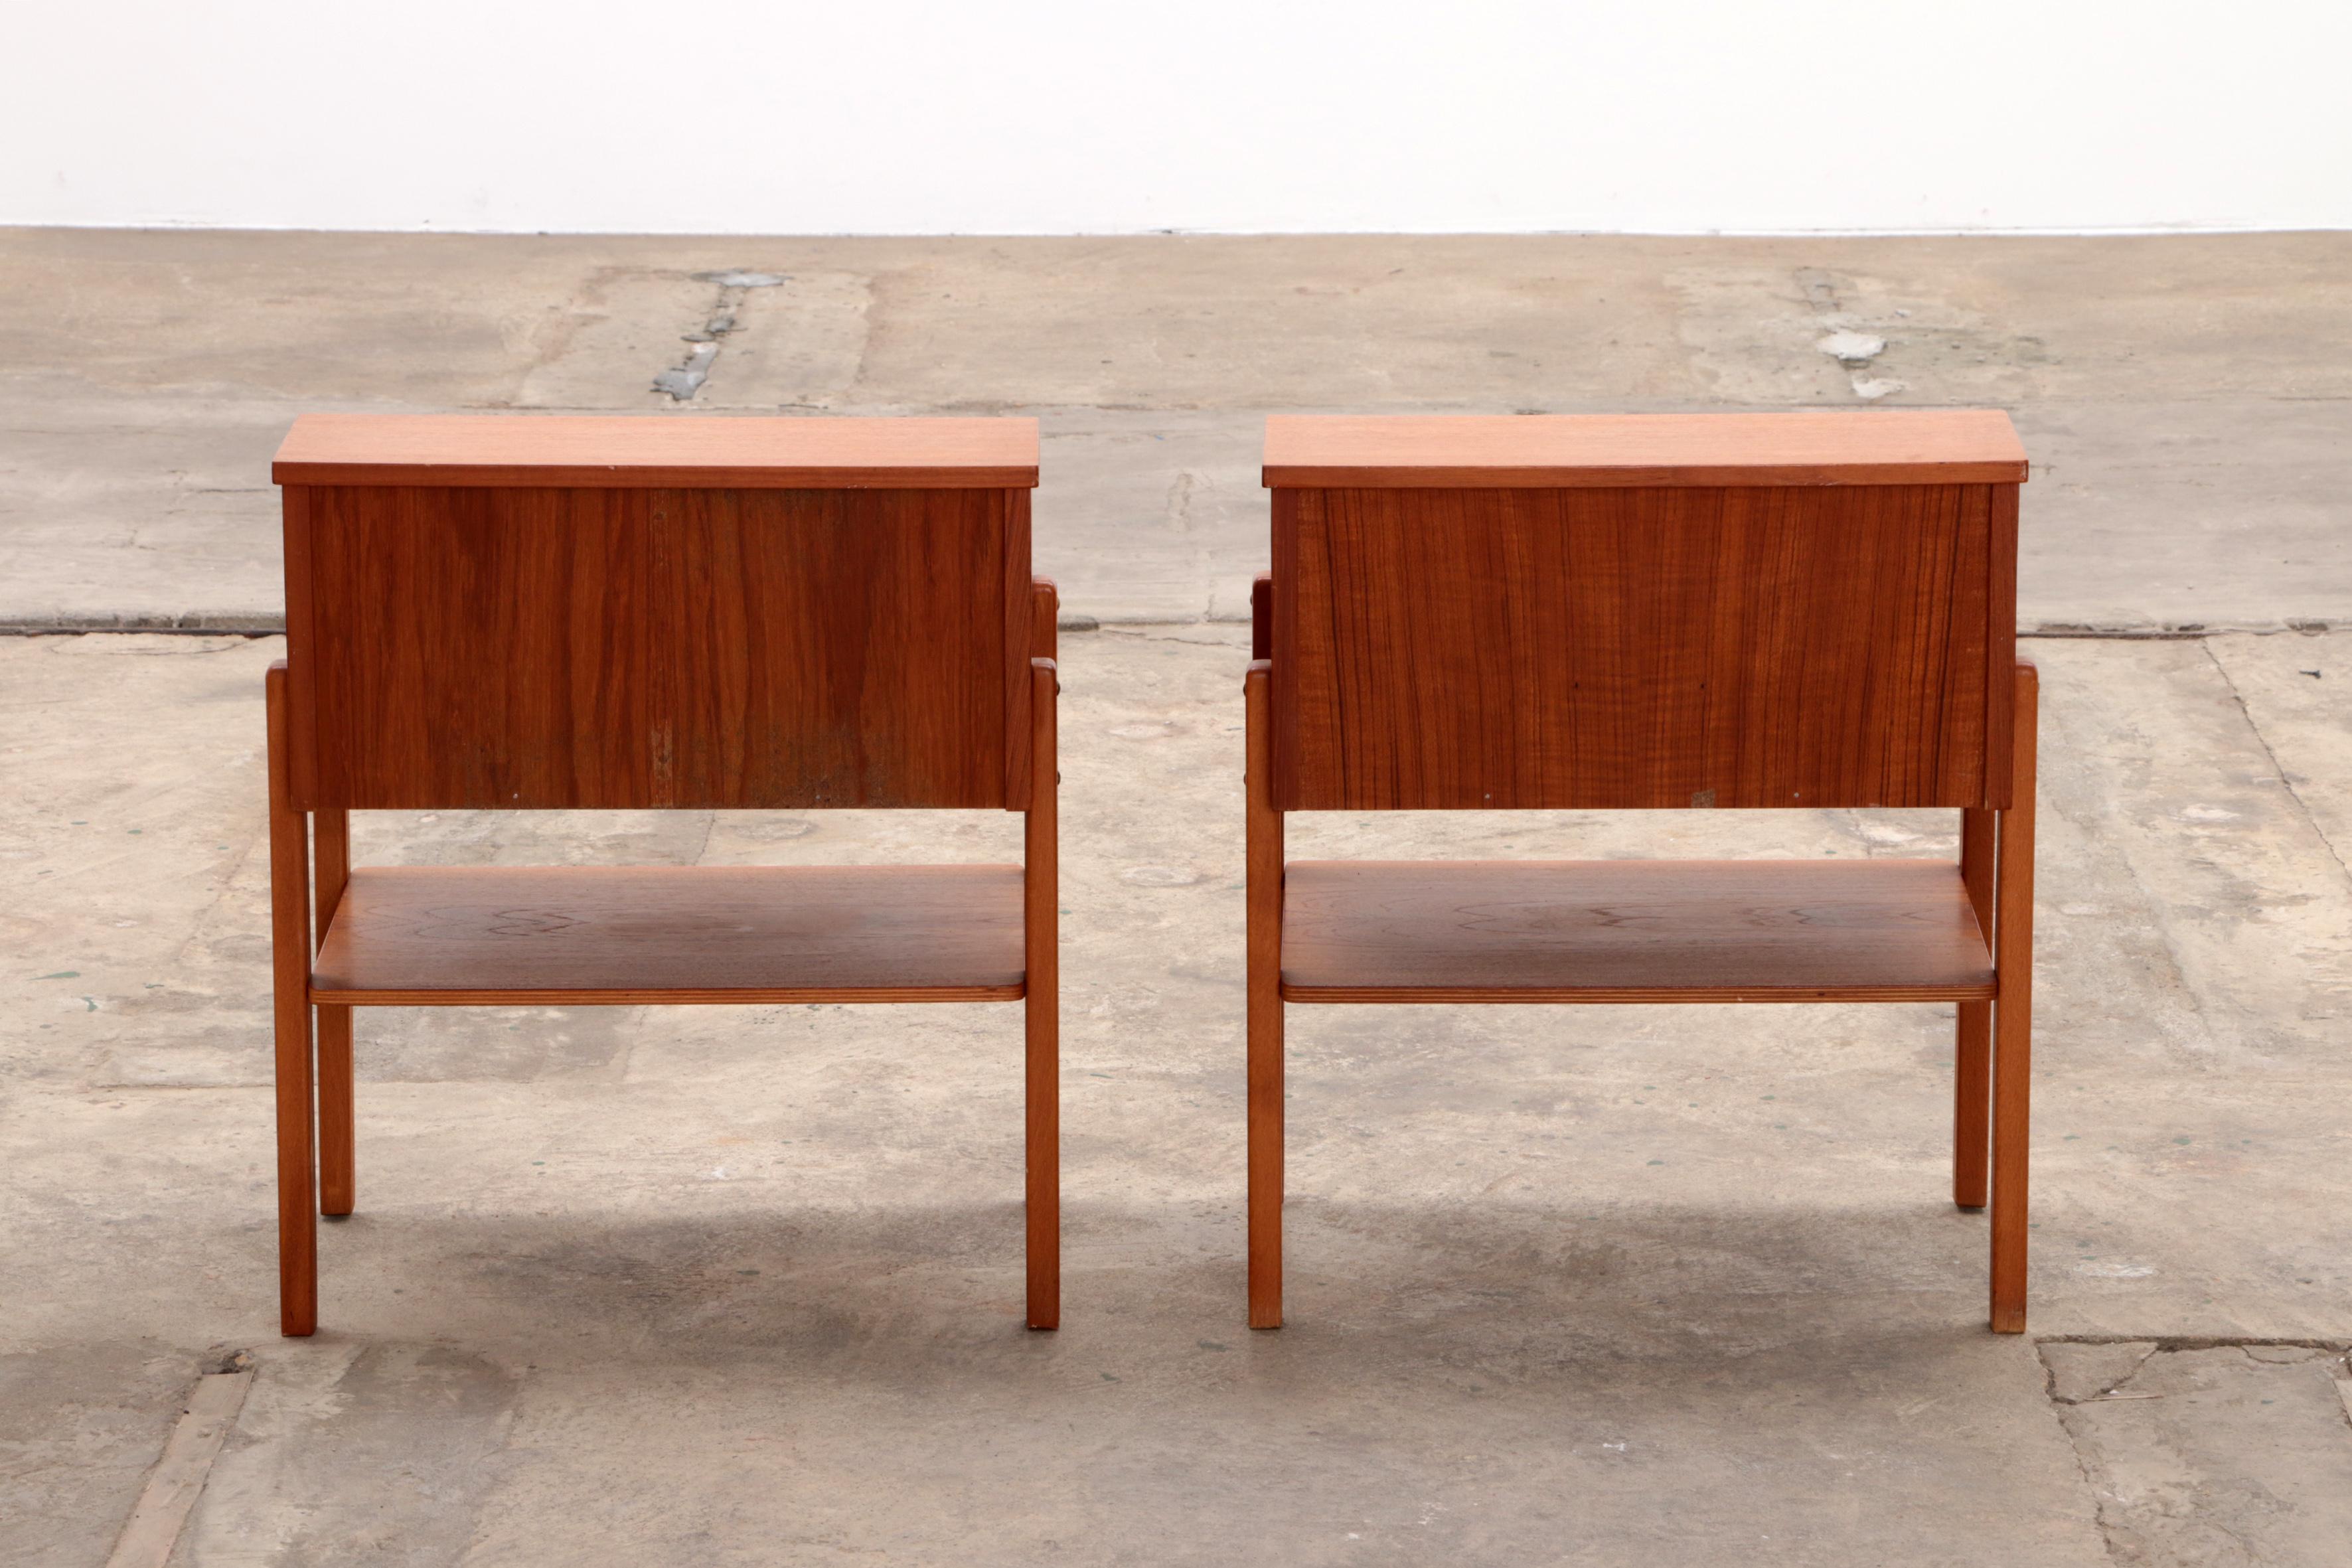 Pair of Scandinavian Bedside Tables in Teak by AB Carlstrom & Co, 1960 For Sale 3